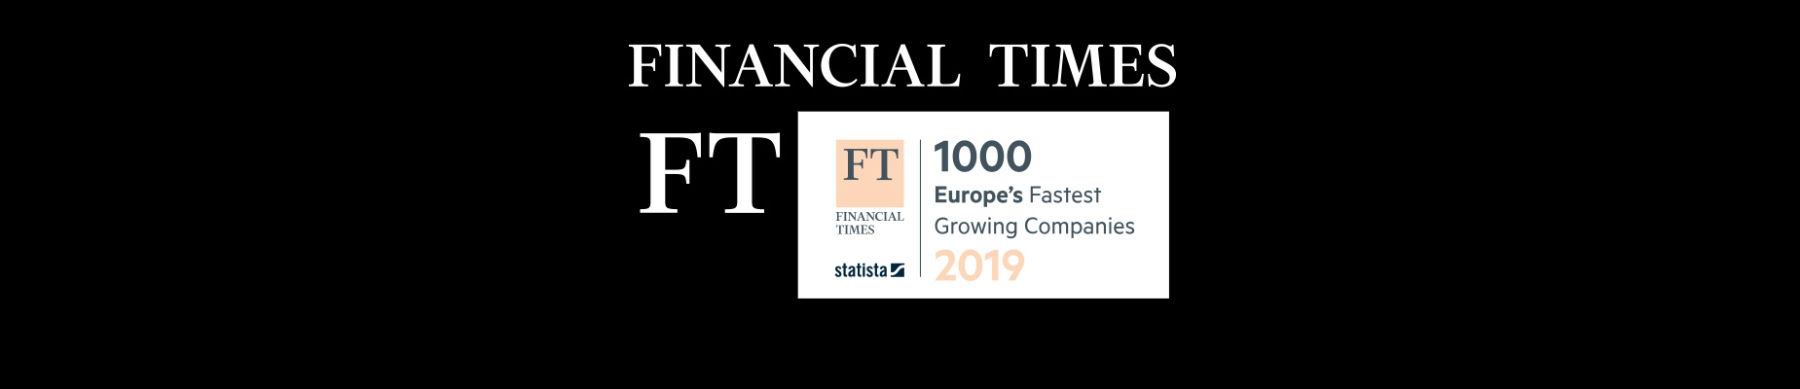 Europe’s Fastest Growing Companies